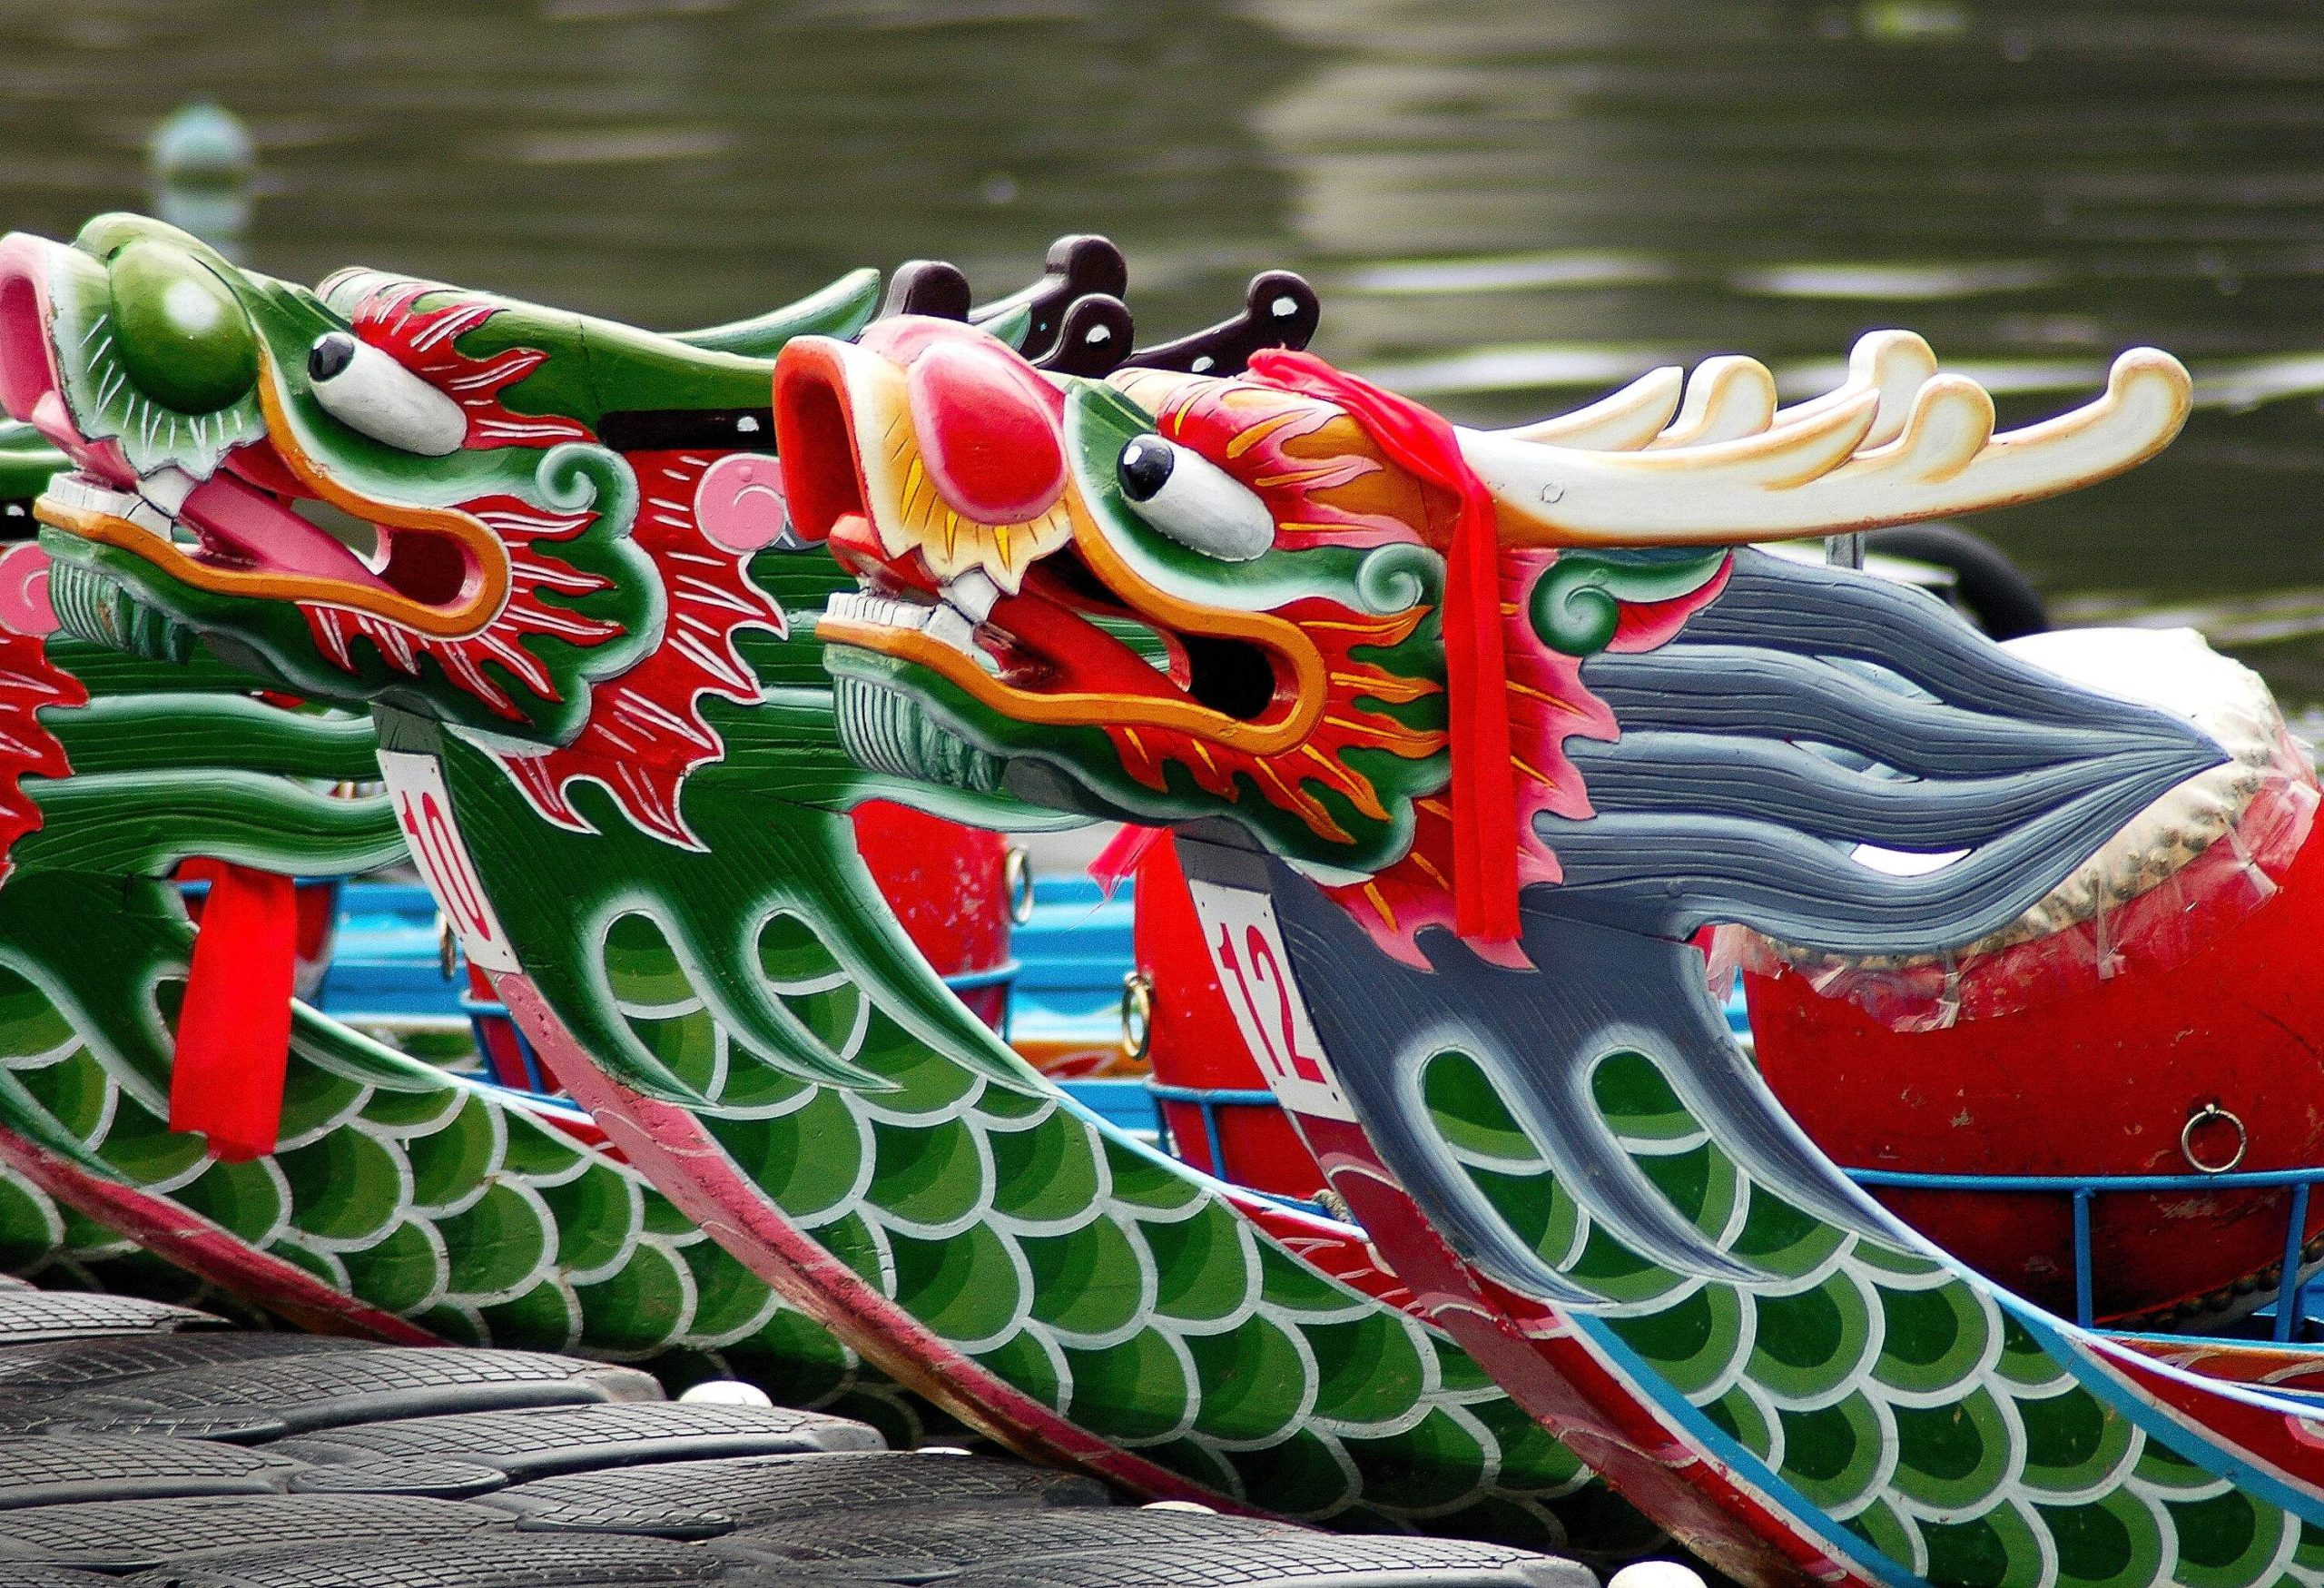 Dragon boats find rest as they moor along the calm waterways.